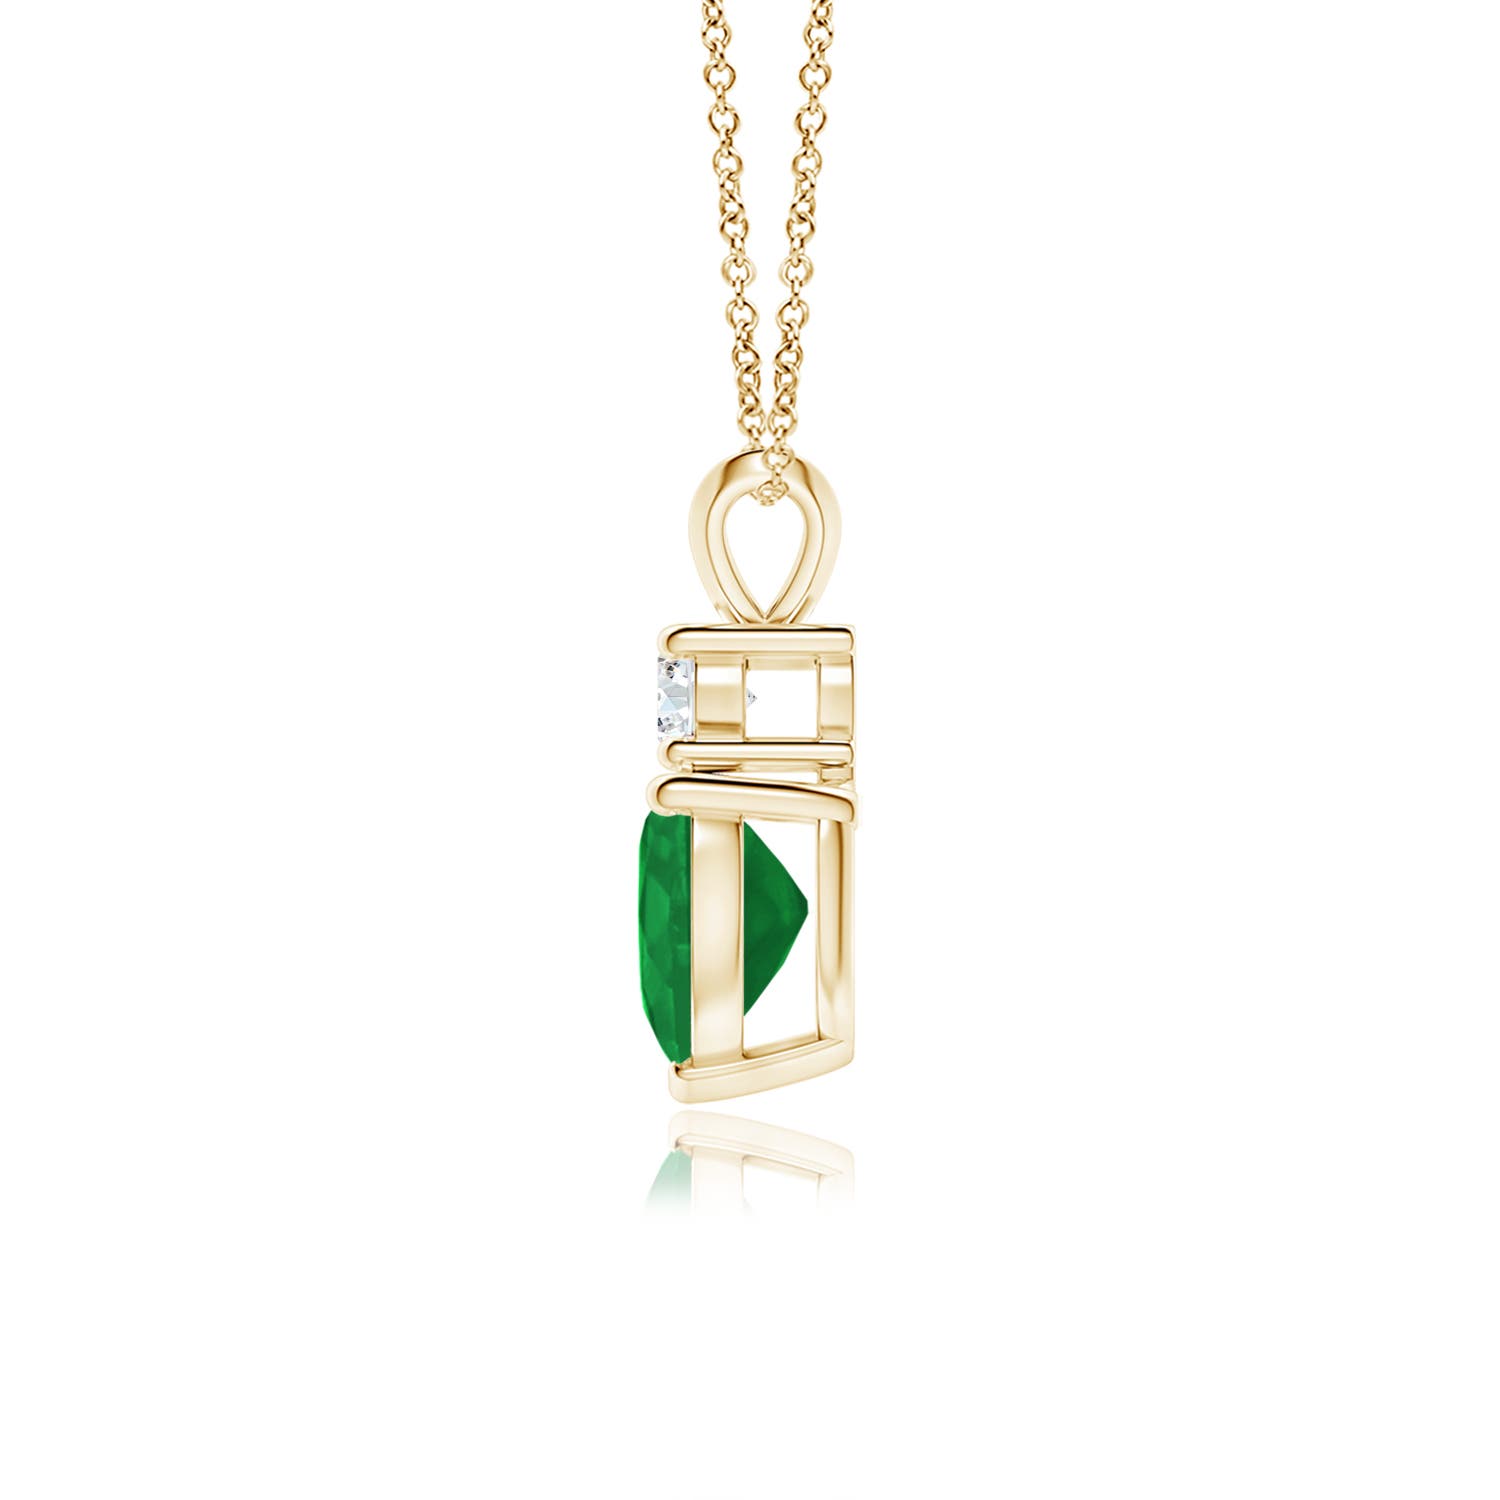 A - Emerald / 1.35 CT / 14 KT Yellow Gold